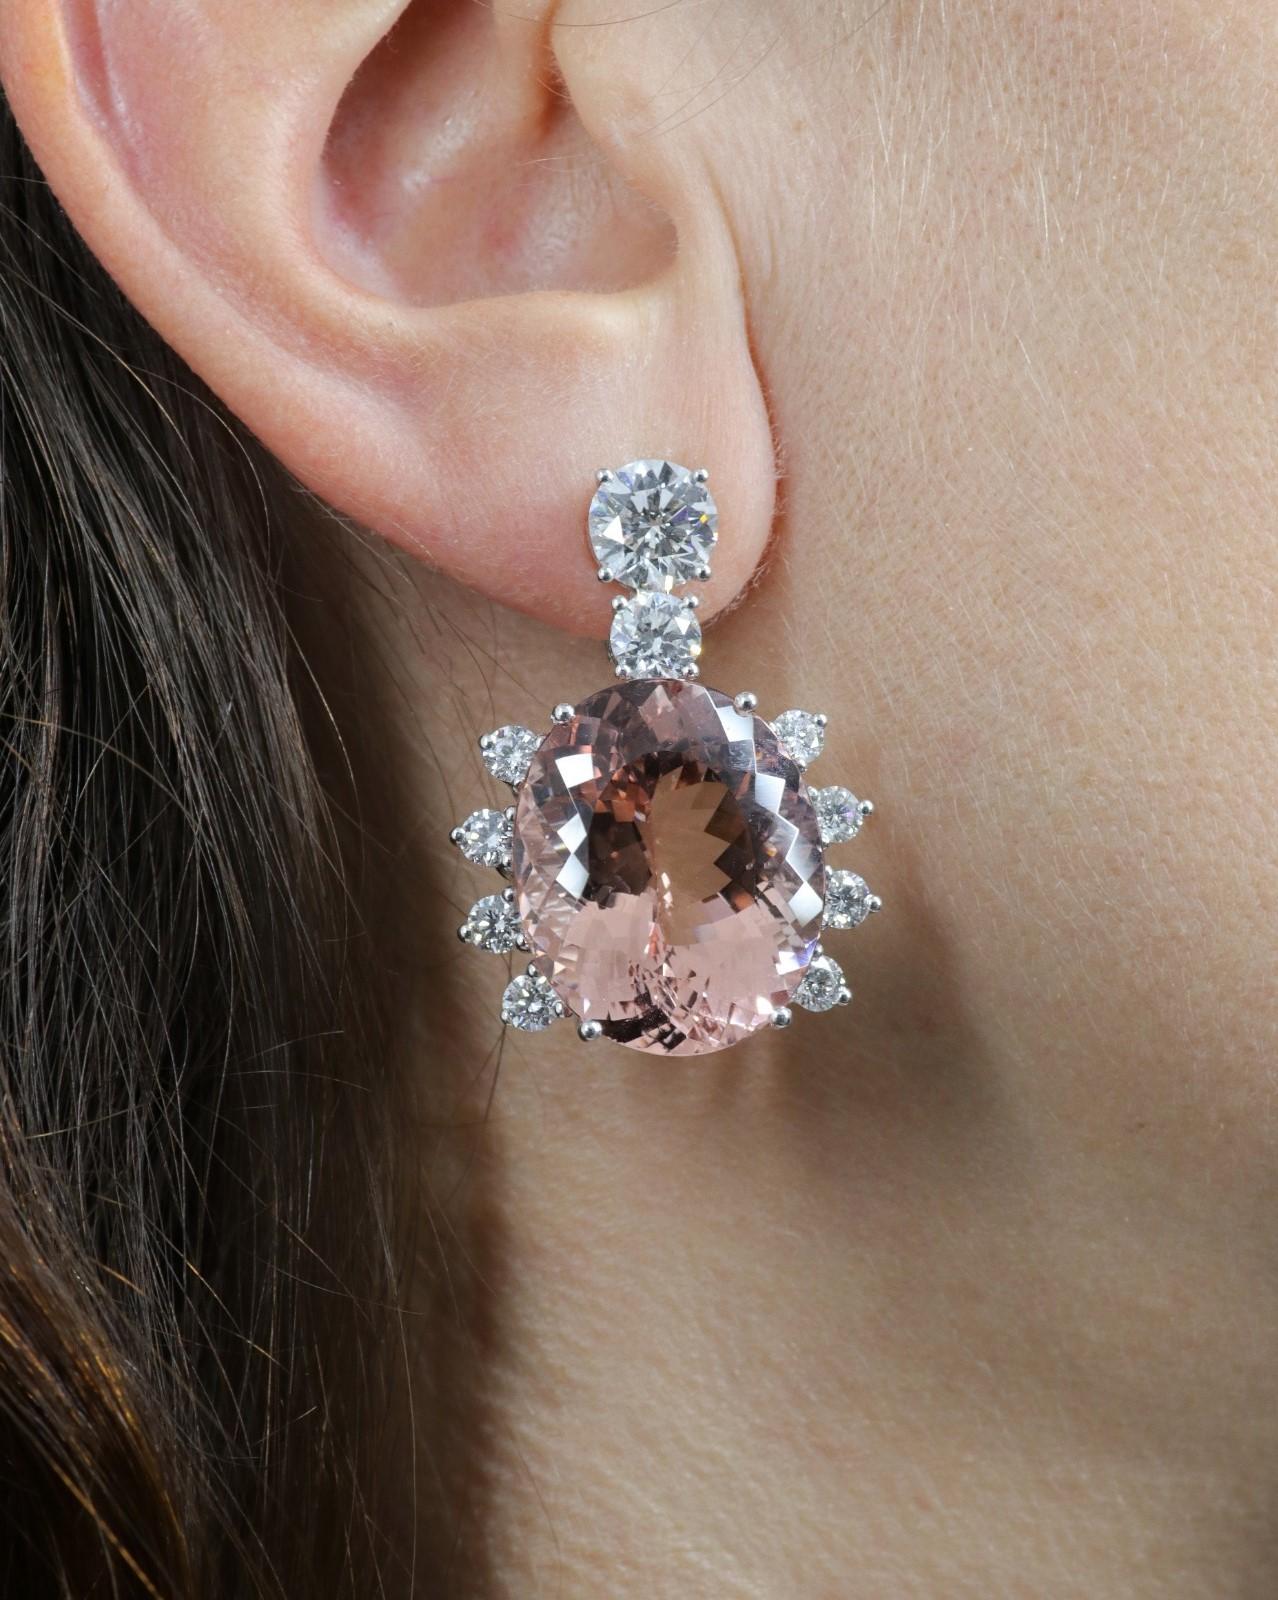 These one of a kind earrings designed by Italian jeweller Delfina Delettrez are handcrafted in her roman atelier from 18 karat white gold 25 gr, GIA certified 8,06 carat white diamonds and two morganite 60 ct.